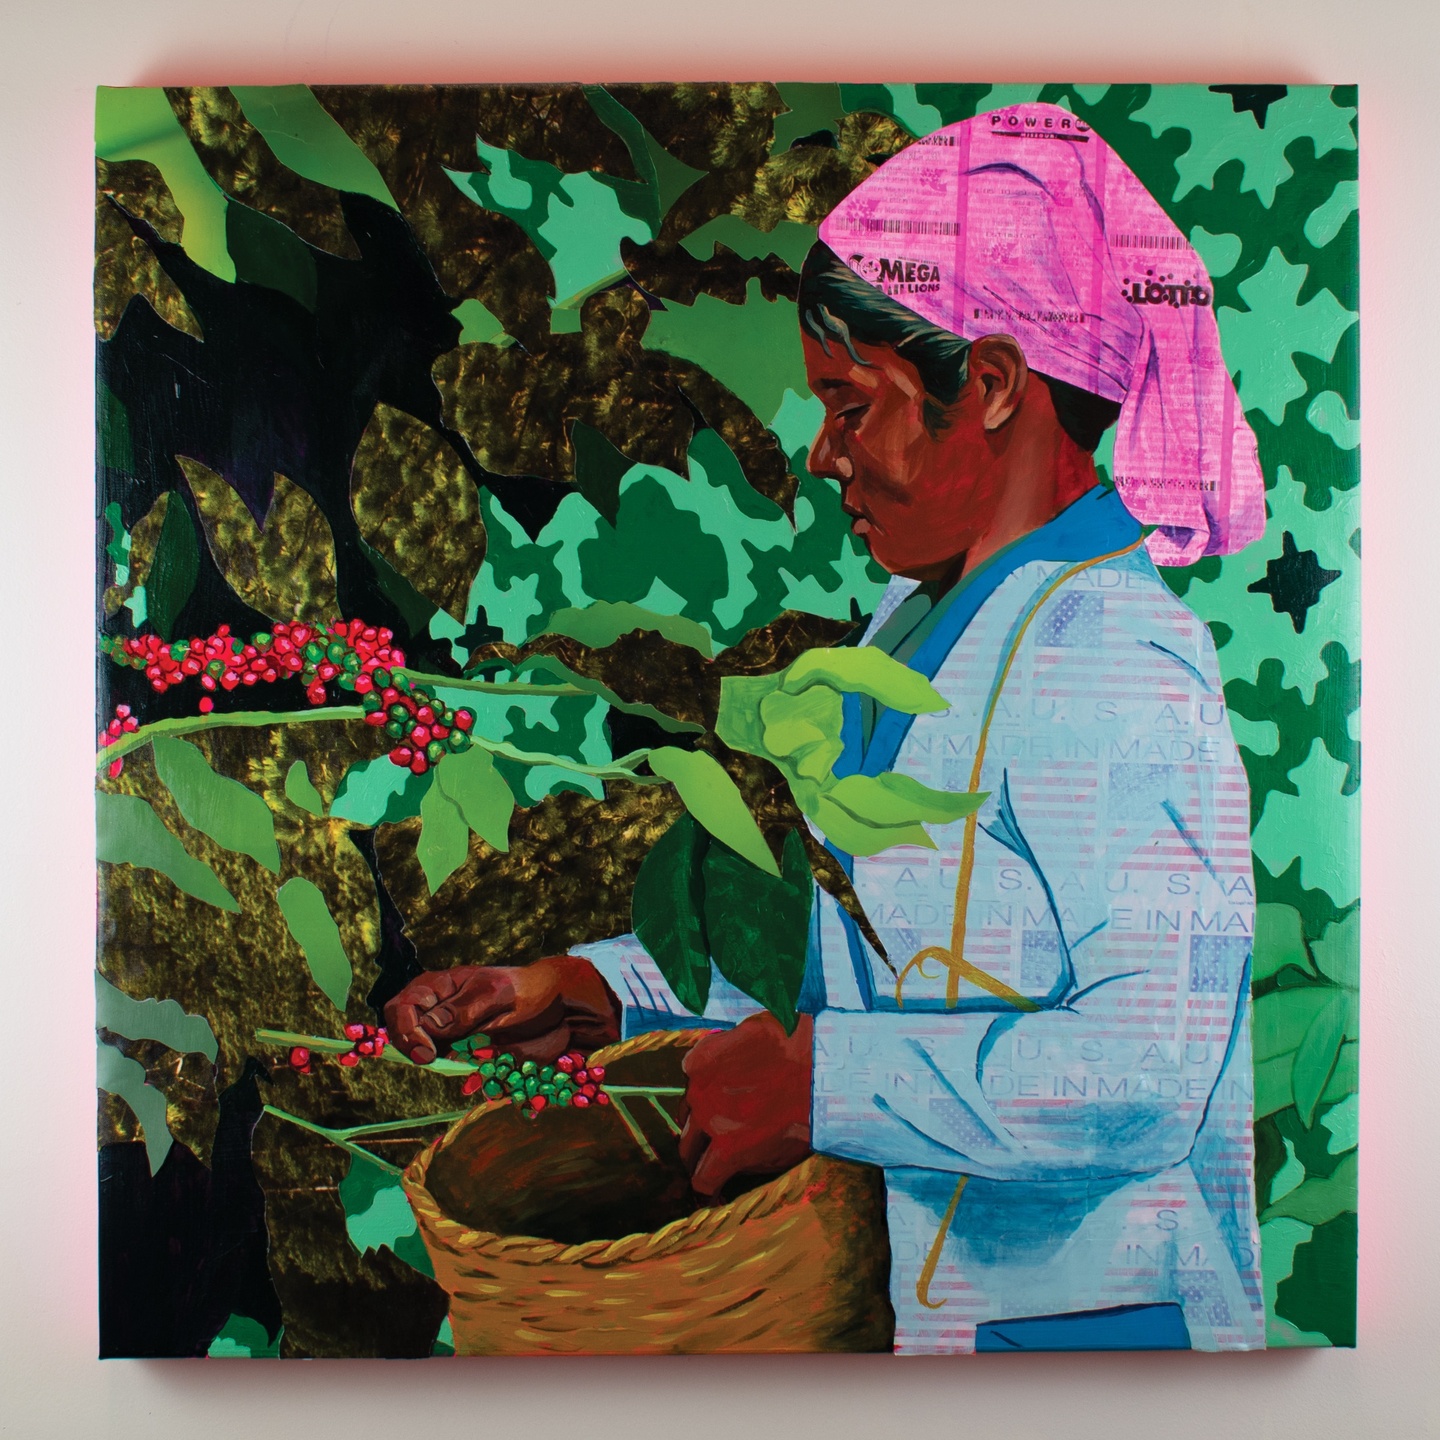 Collage/painting on a square canvas: a person with a pink headscarf gathers berries, a basket in their left hand. There are typographic textures overlaid on the scarf and shirt; on the former, what appears to be a receipt; on the latter, an American flag with the text, "MADE IN U.S.A.".